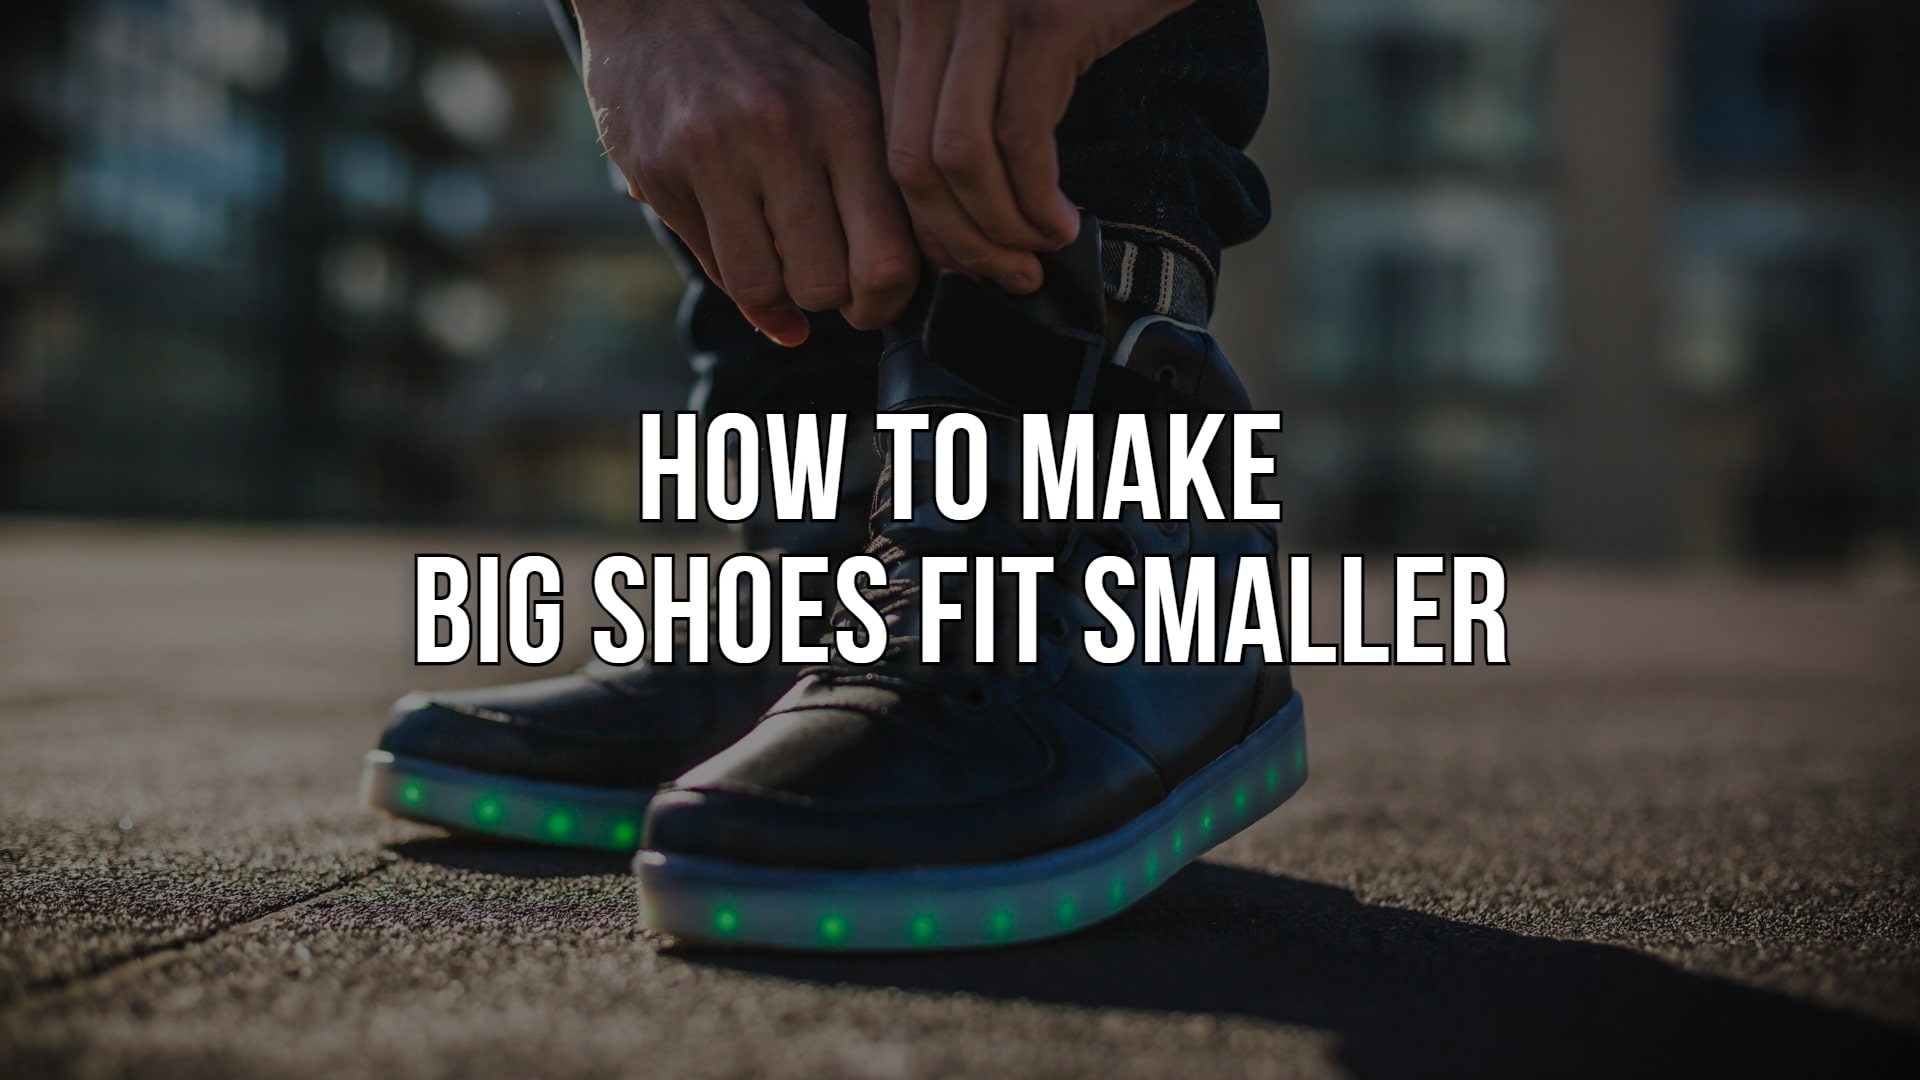 How-to-make-big-shoes-fit-smaller-min